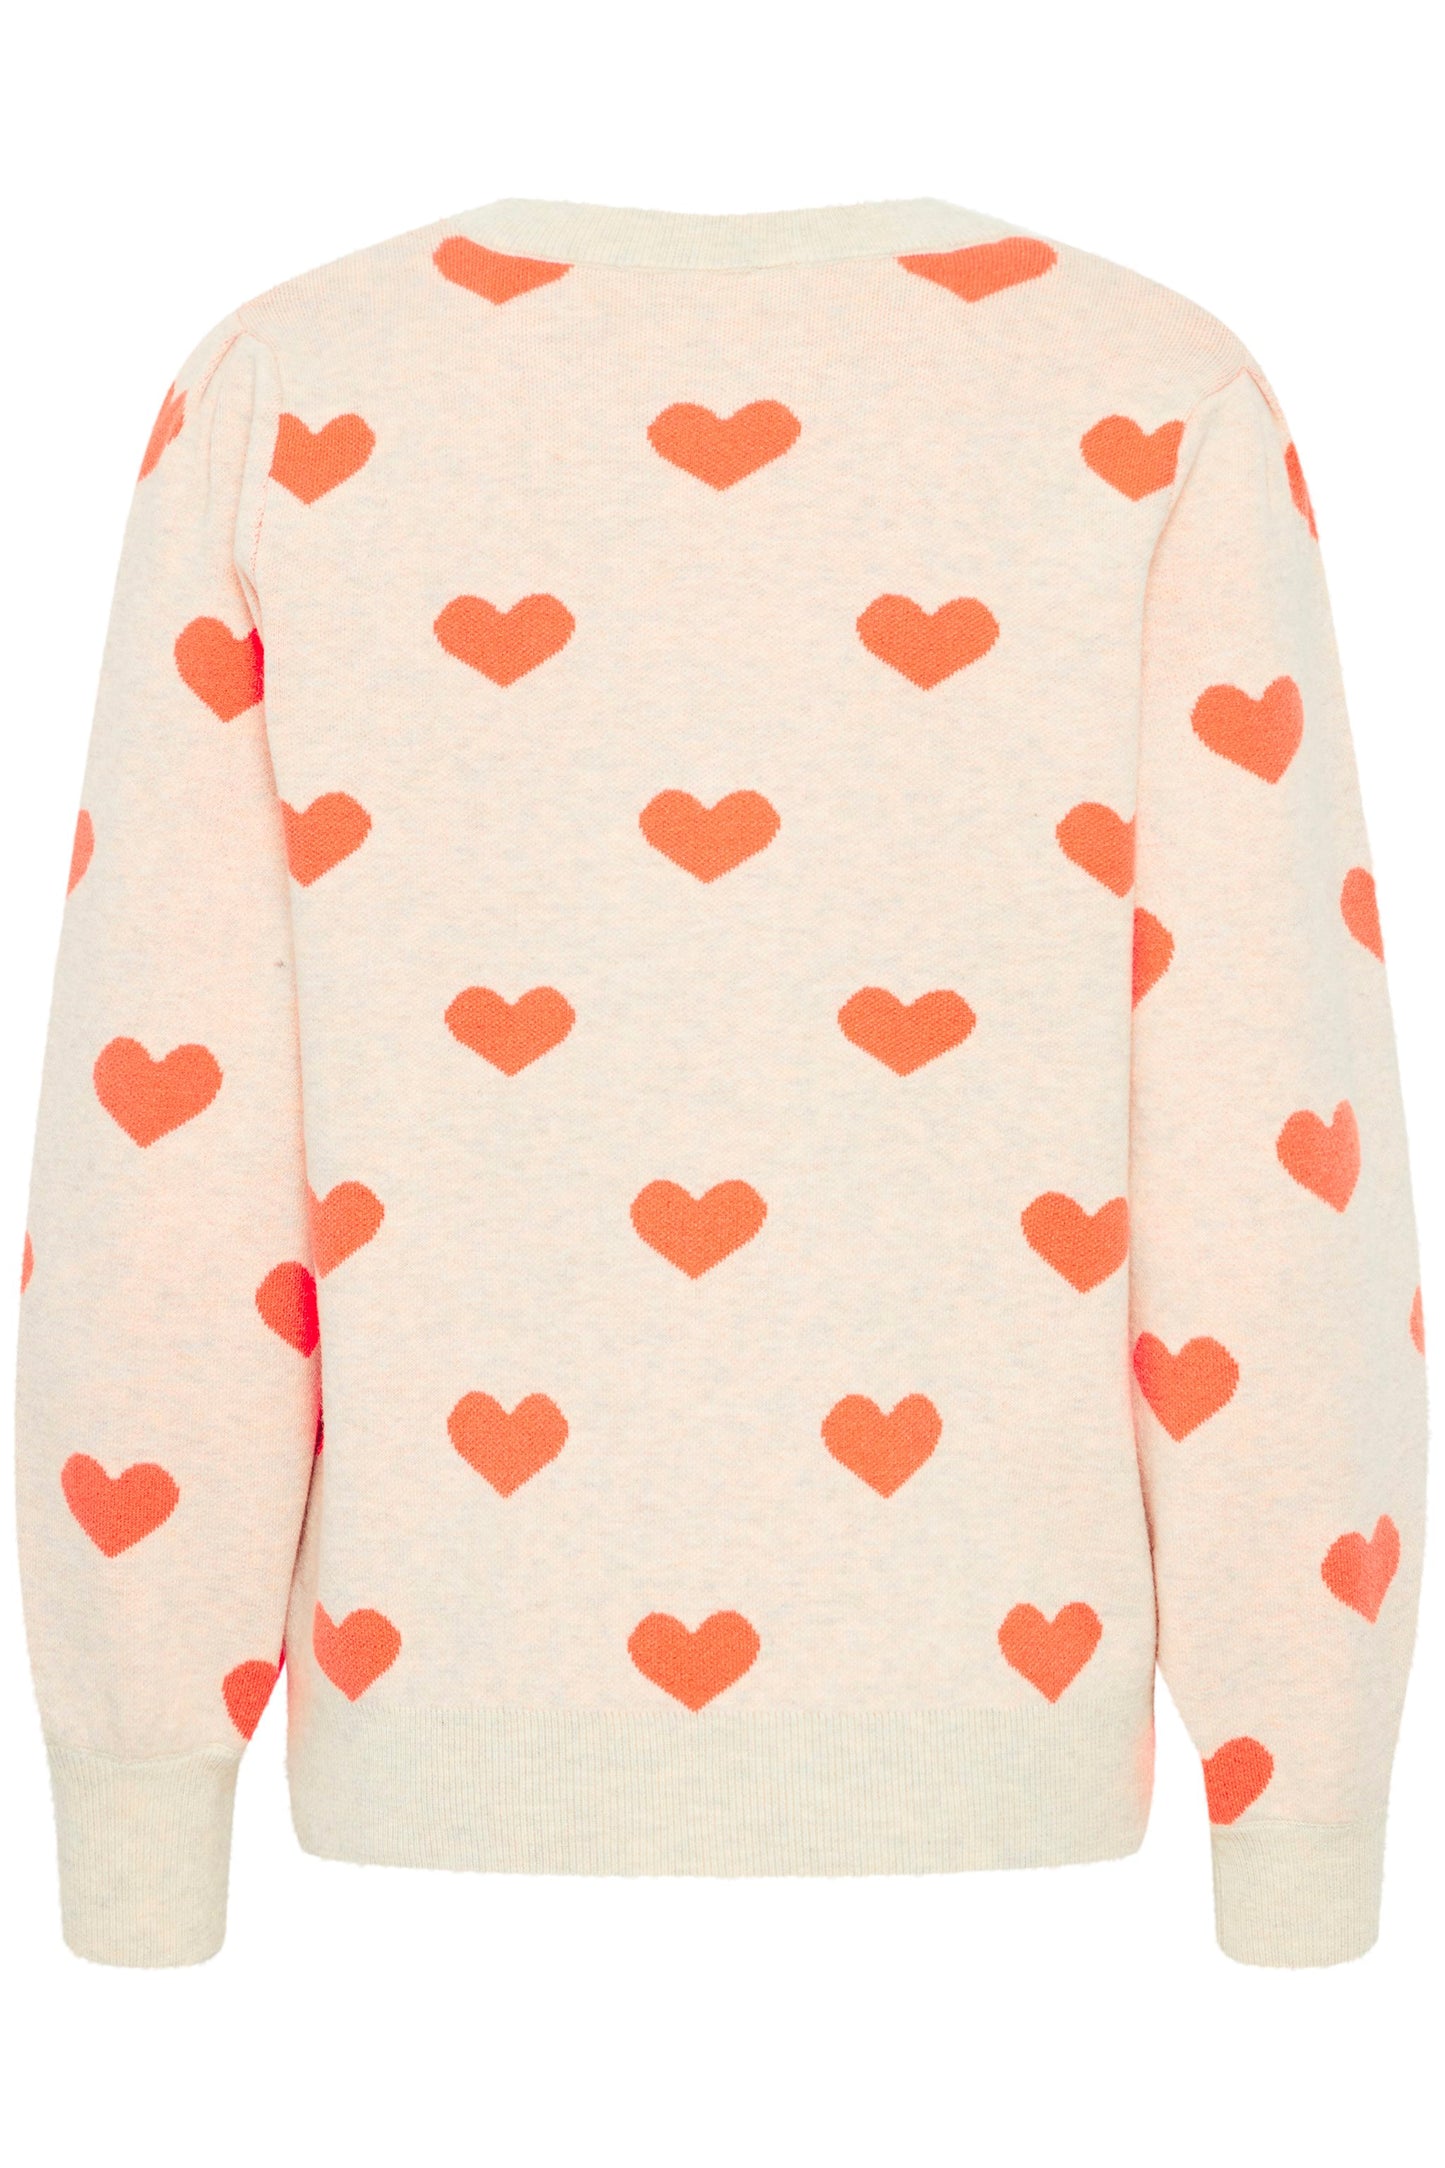 Ichi Brielle Pullover | Oatmeal & Hot Coral